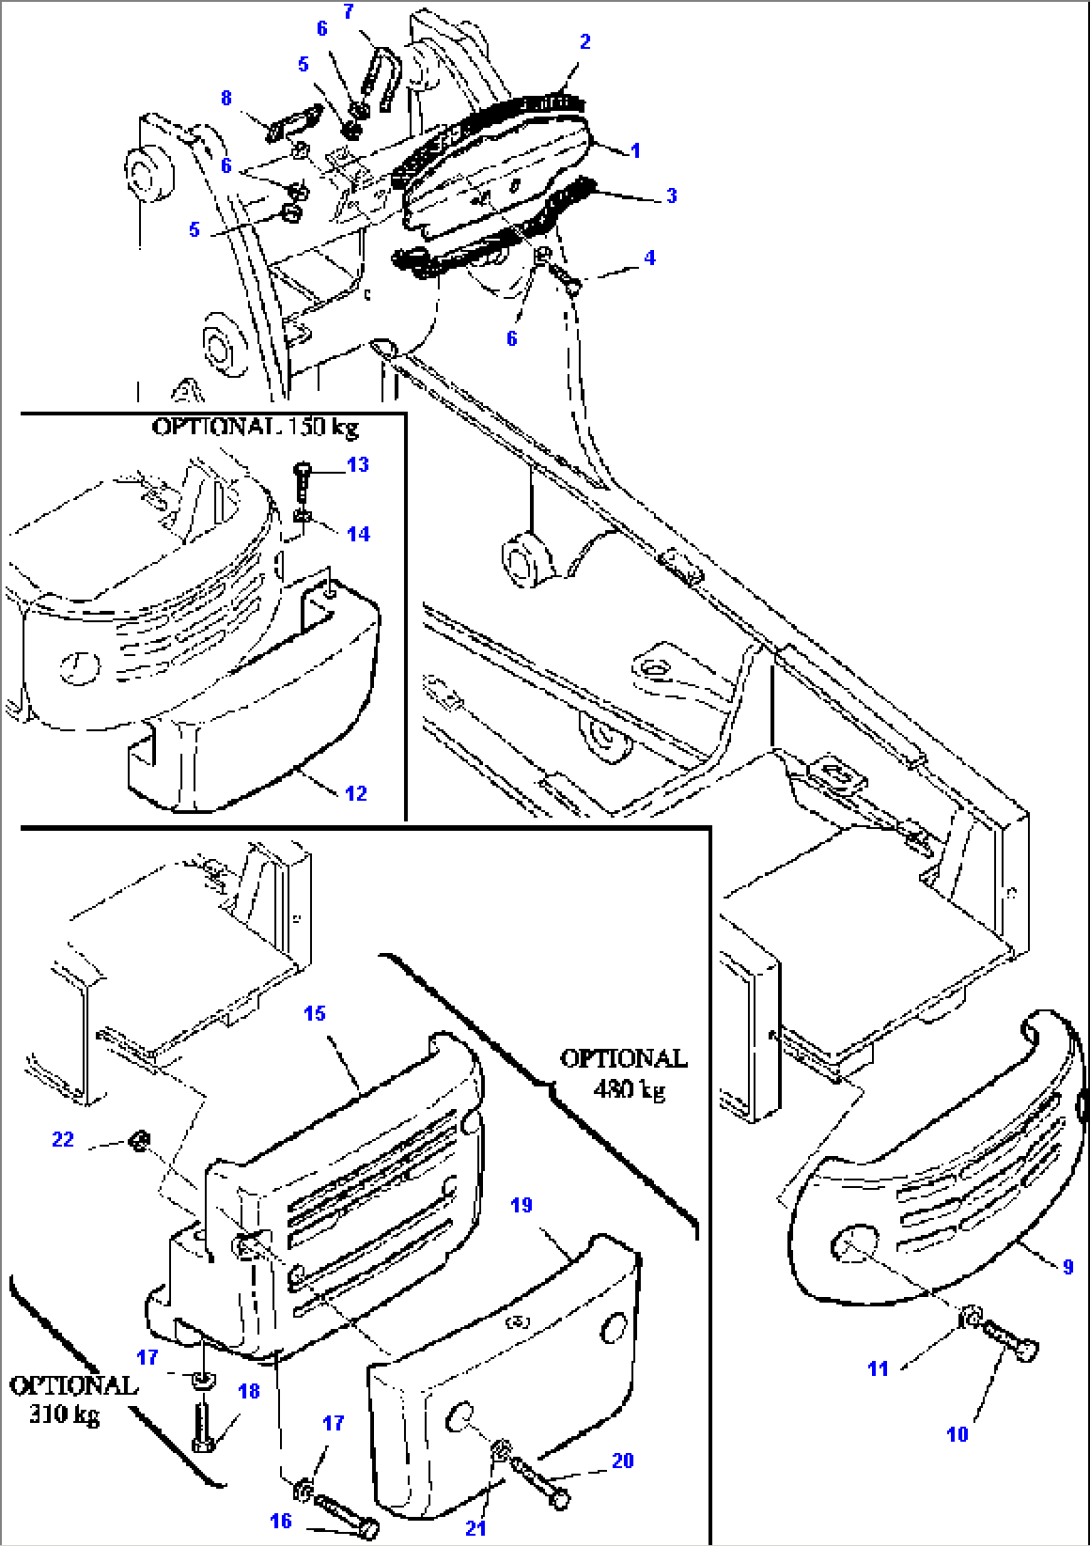 FIG. M5010-01A0 COUNTERWEIGHT